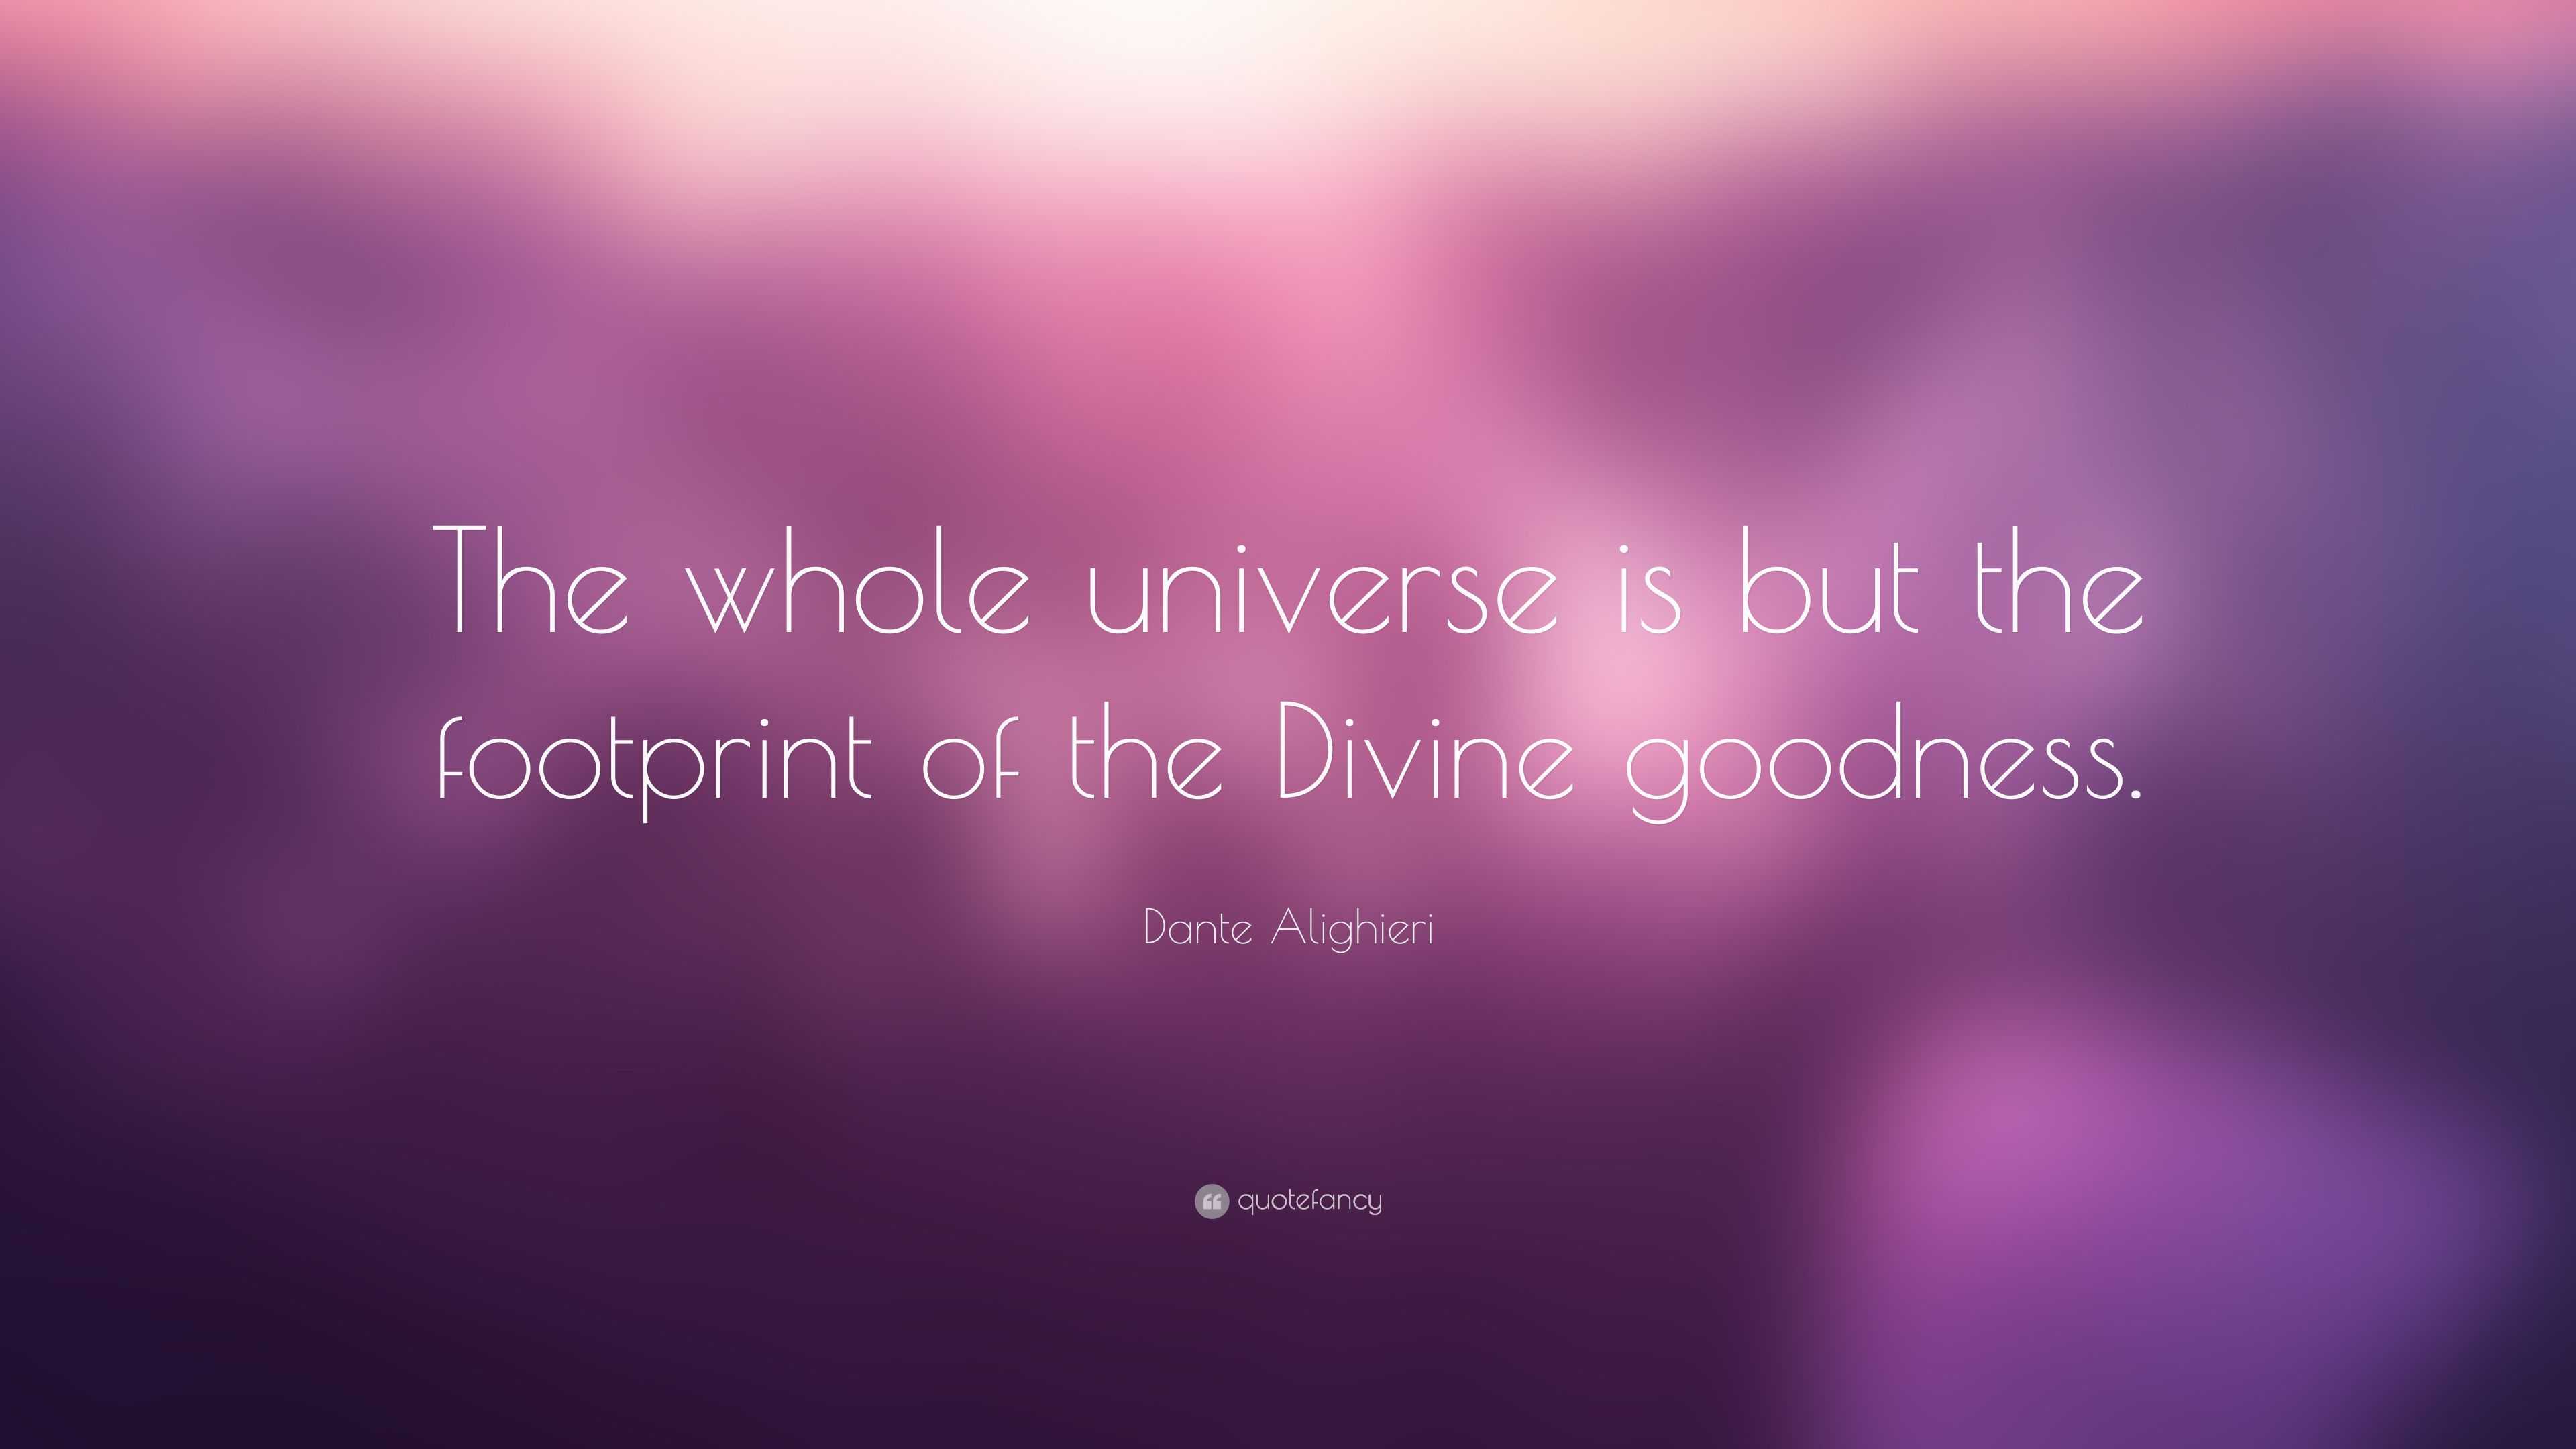 Dante Alighieri Quote: “The whole universe is but the footprint of the ...